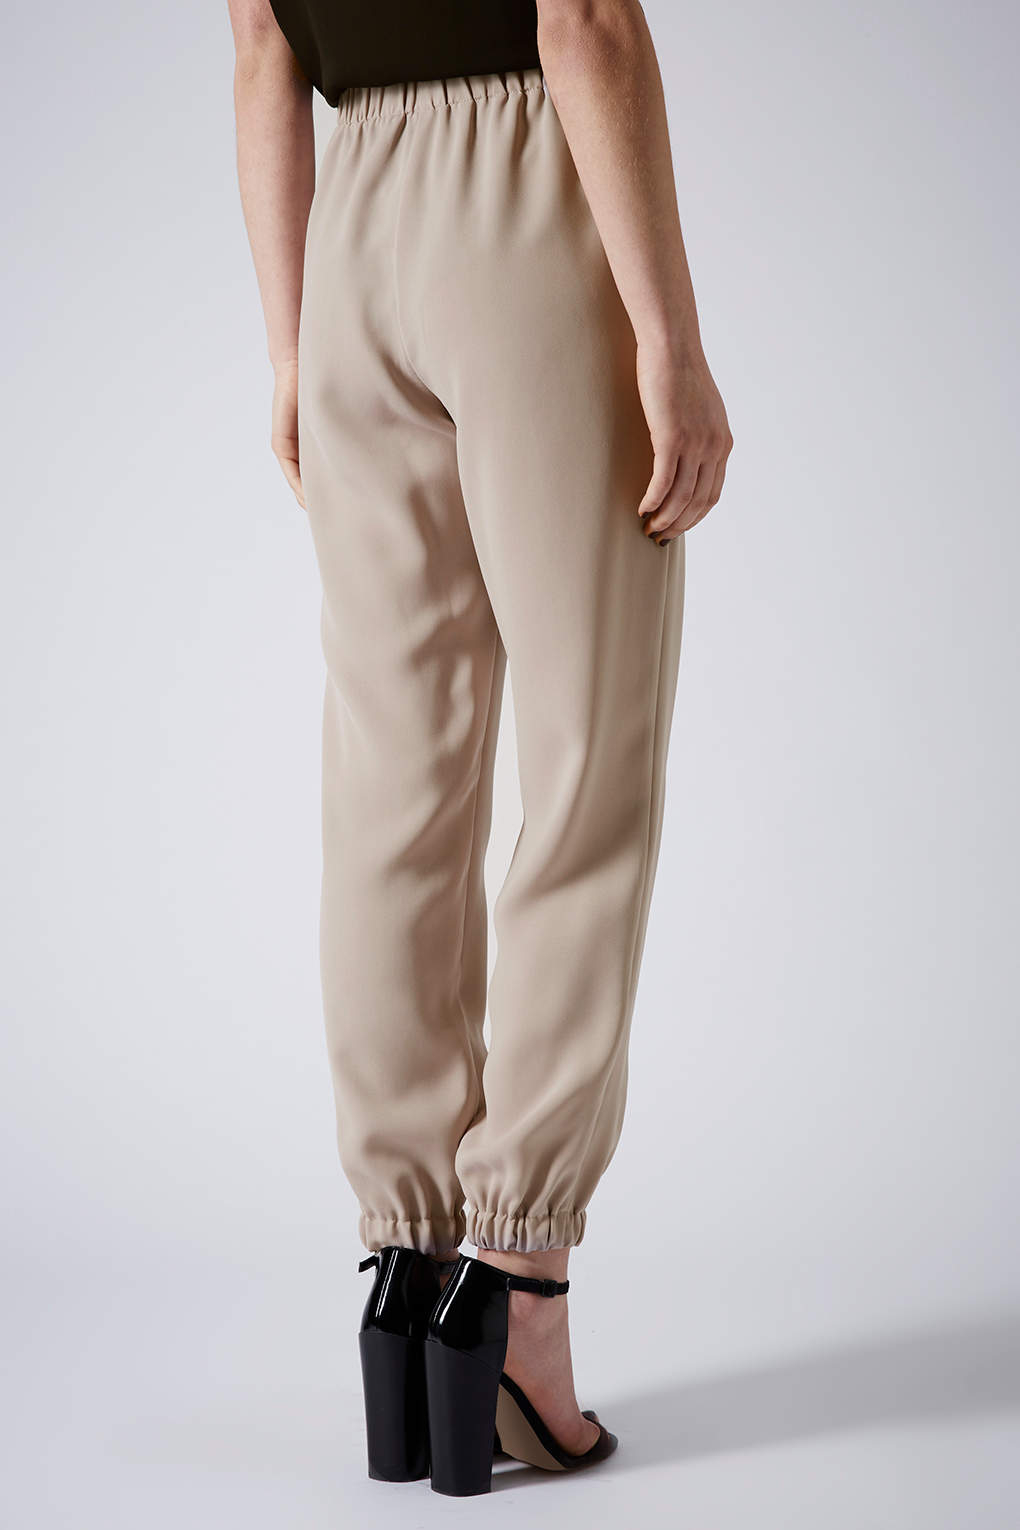 TOPSHOP Crepe Joggers in Mink (Natural) - Lyst